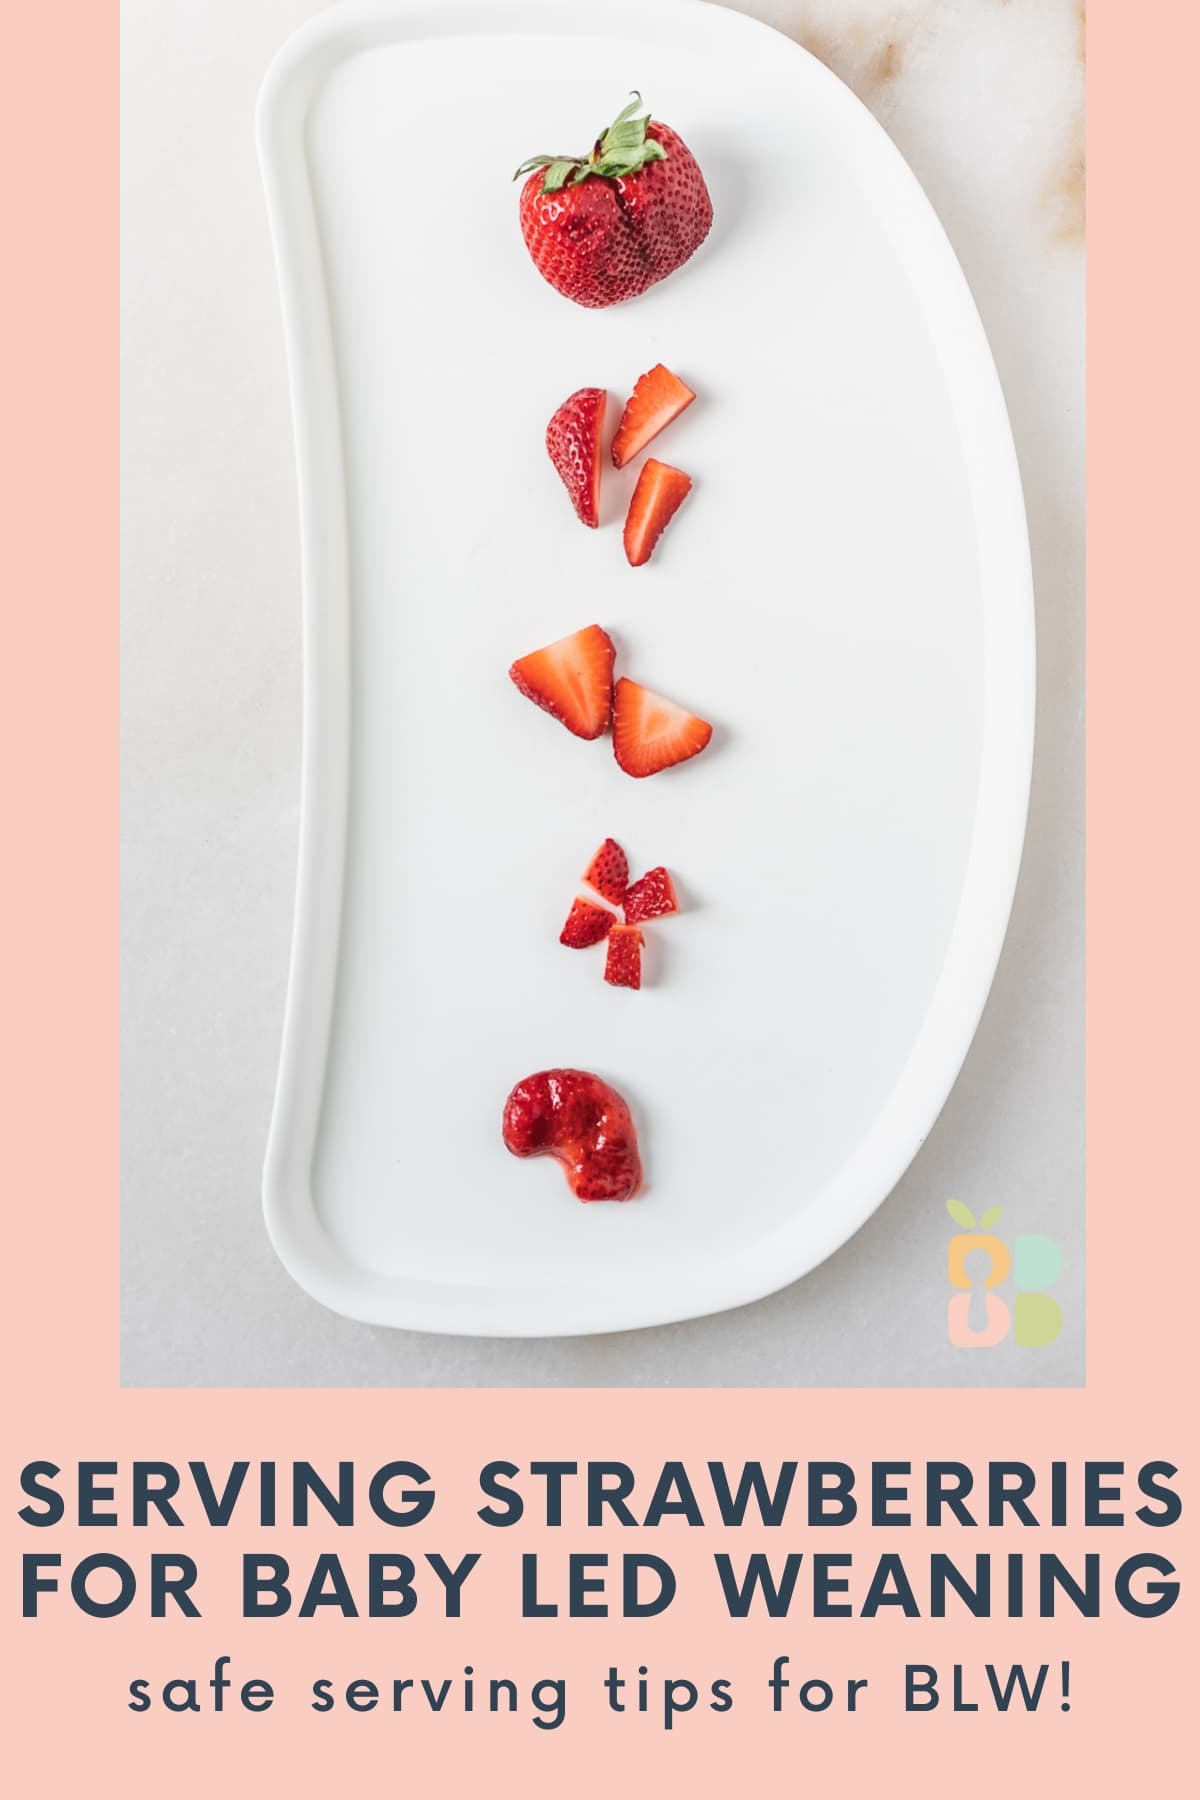 baby high chair tray with different ways of serving strawberries lined up on it with text overlay.
